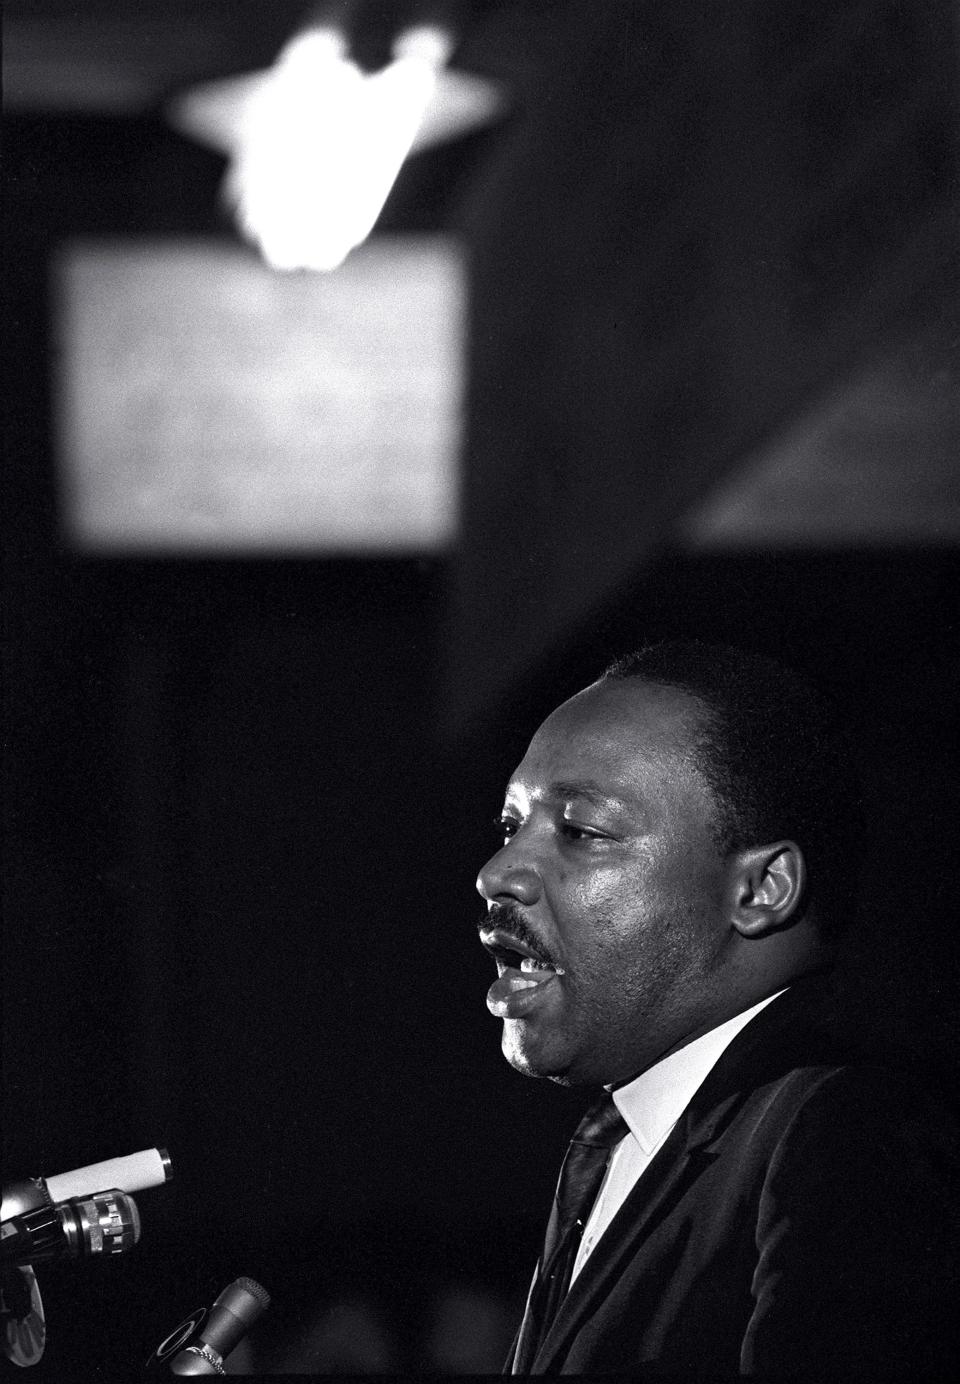 In this file photo, the Rev. Martin Luther King Jr. makes his last public appearance at the Mason Temple in Memphis, Tenn., on April 3, 1968. The following day King was assassinated on his motel balcony.